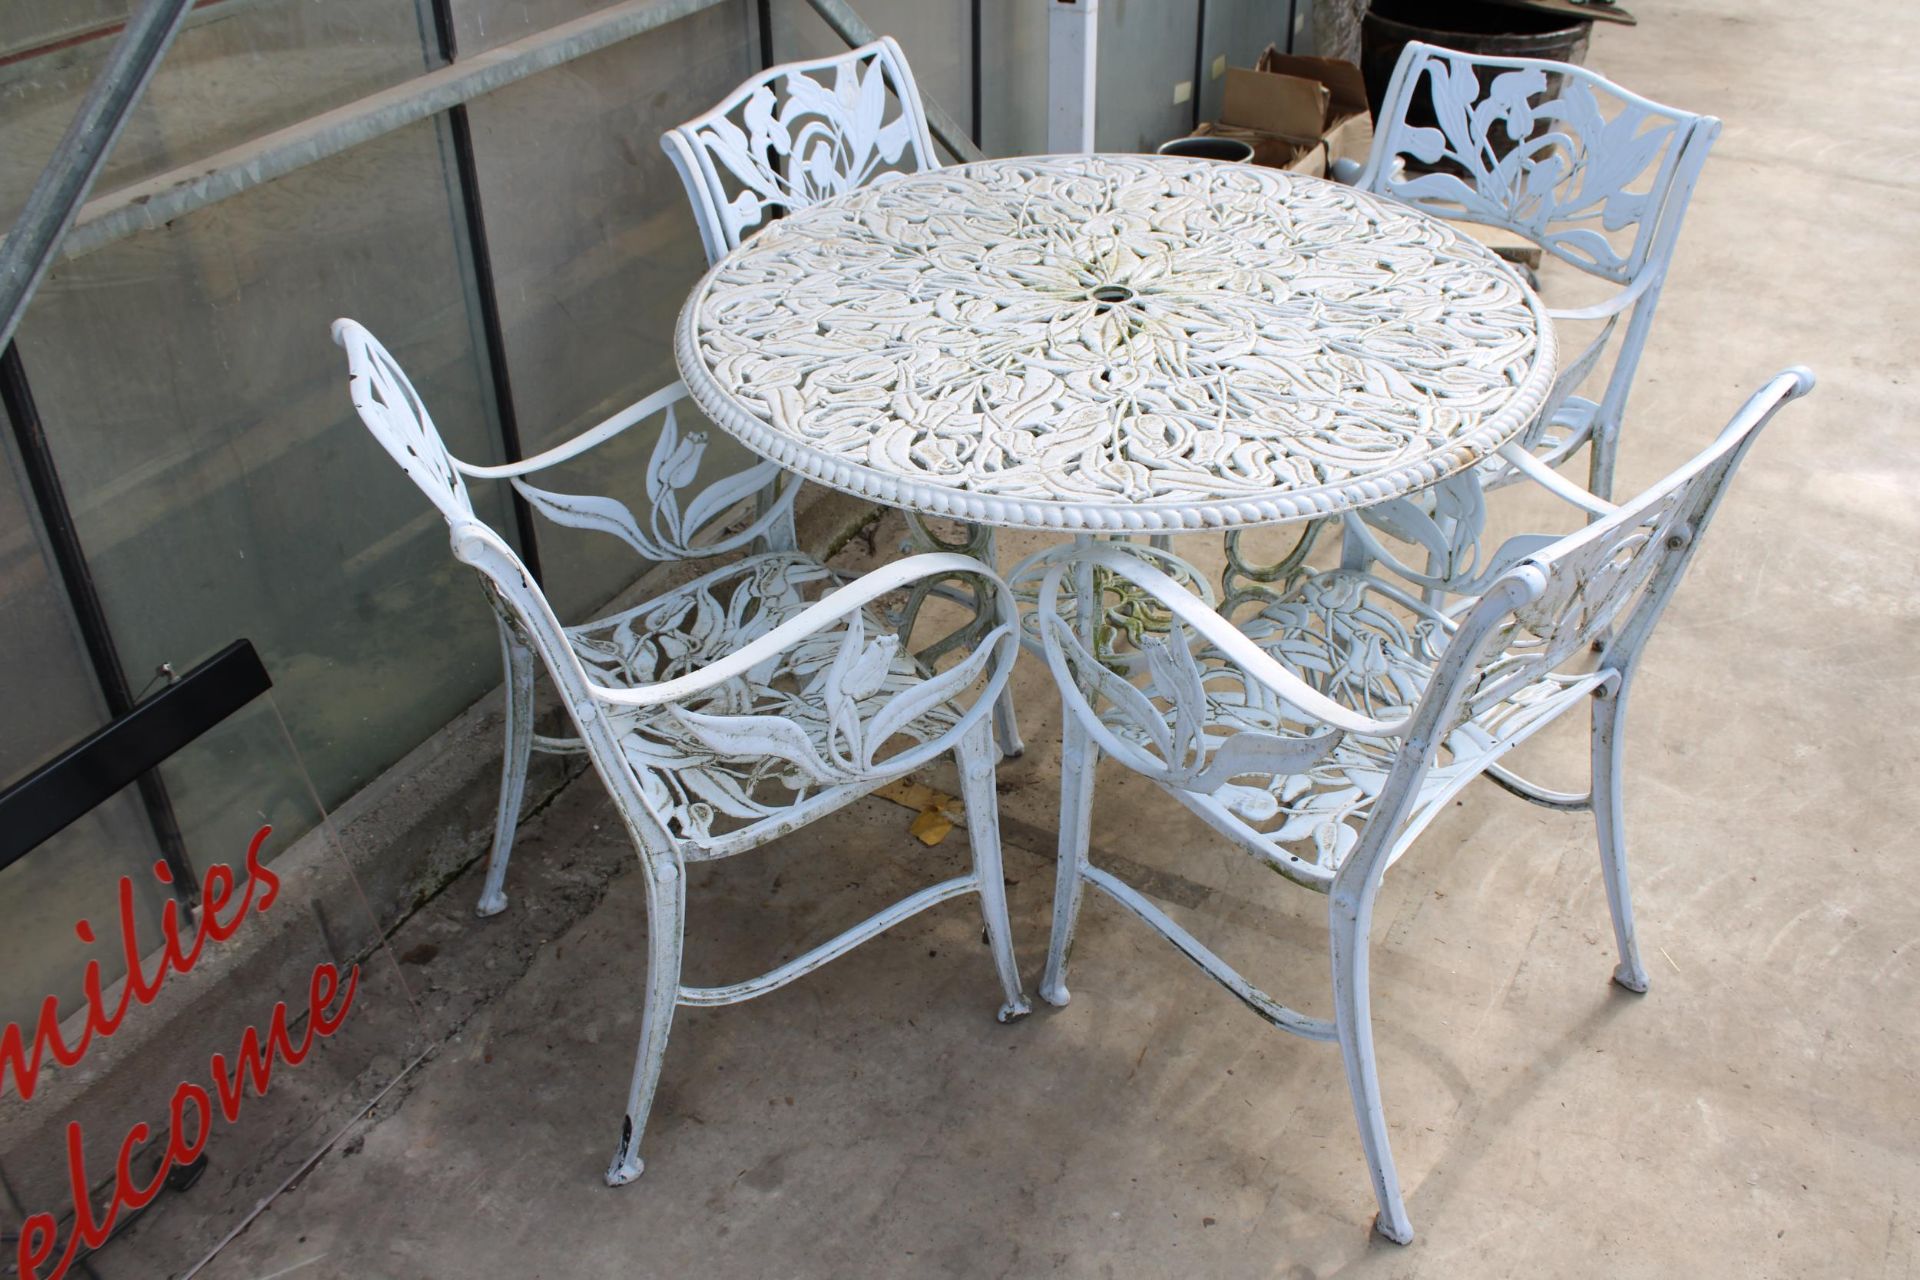 A WHITE CAST ALLOY BISTRO SET COMPRISING OF A LARGE ROUND TABLE AND FOUR CARVER CHAIRS - Image 2 of 3